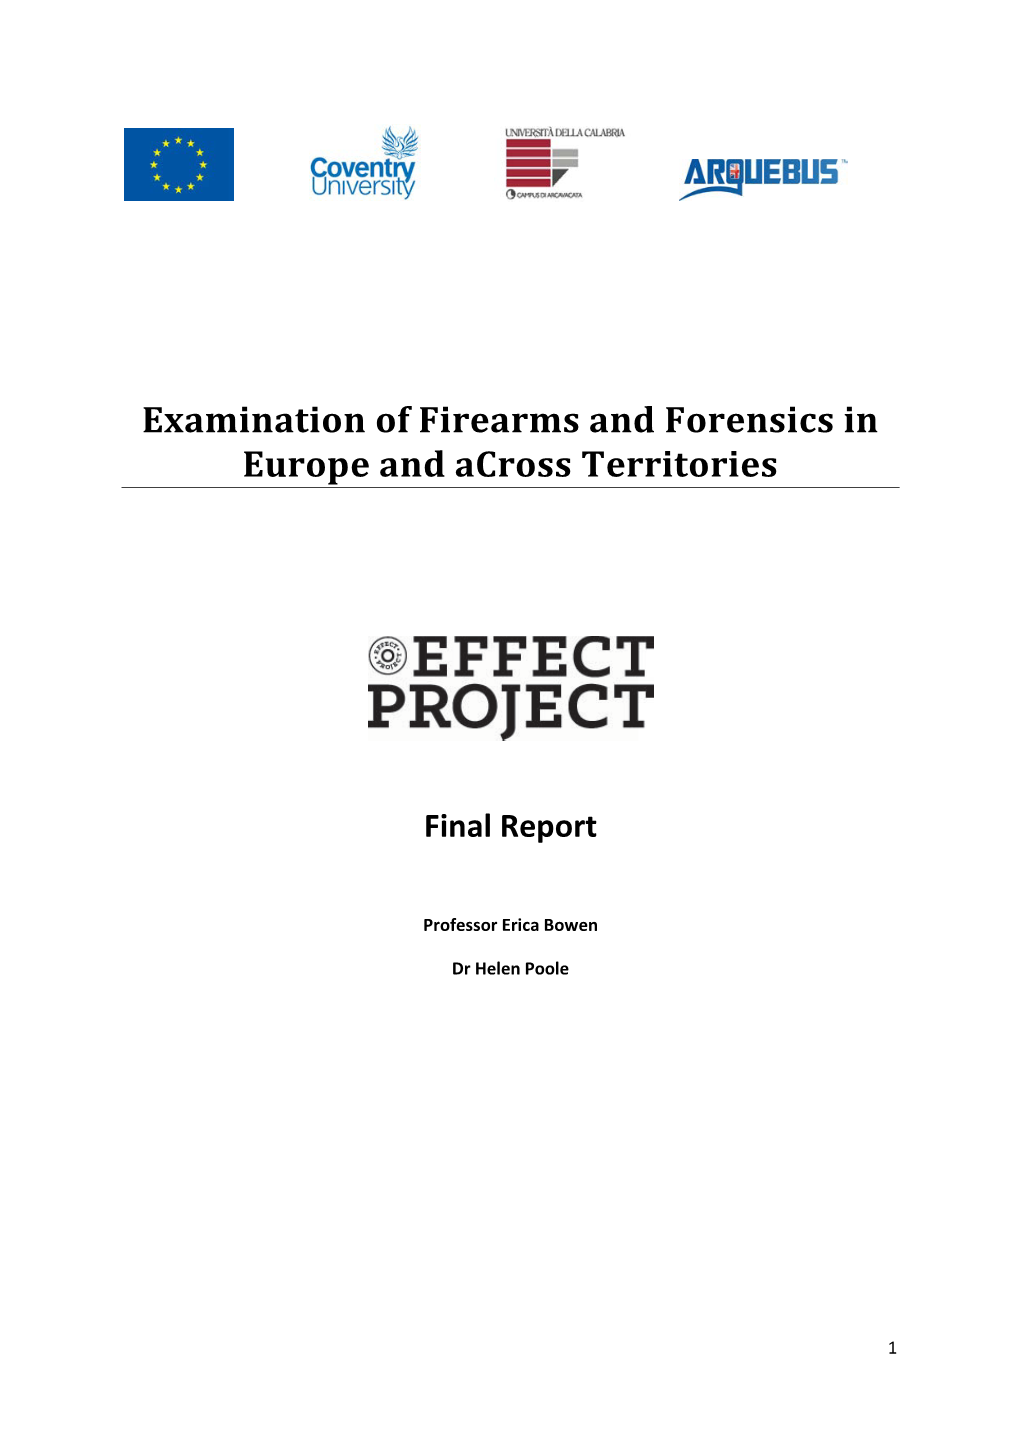 Examination of Firearms and Forensics in Europe and Across Territories